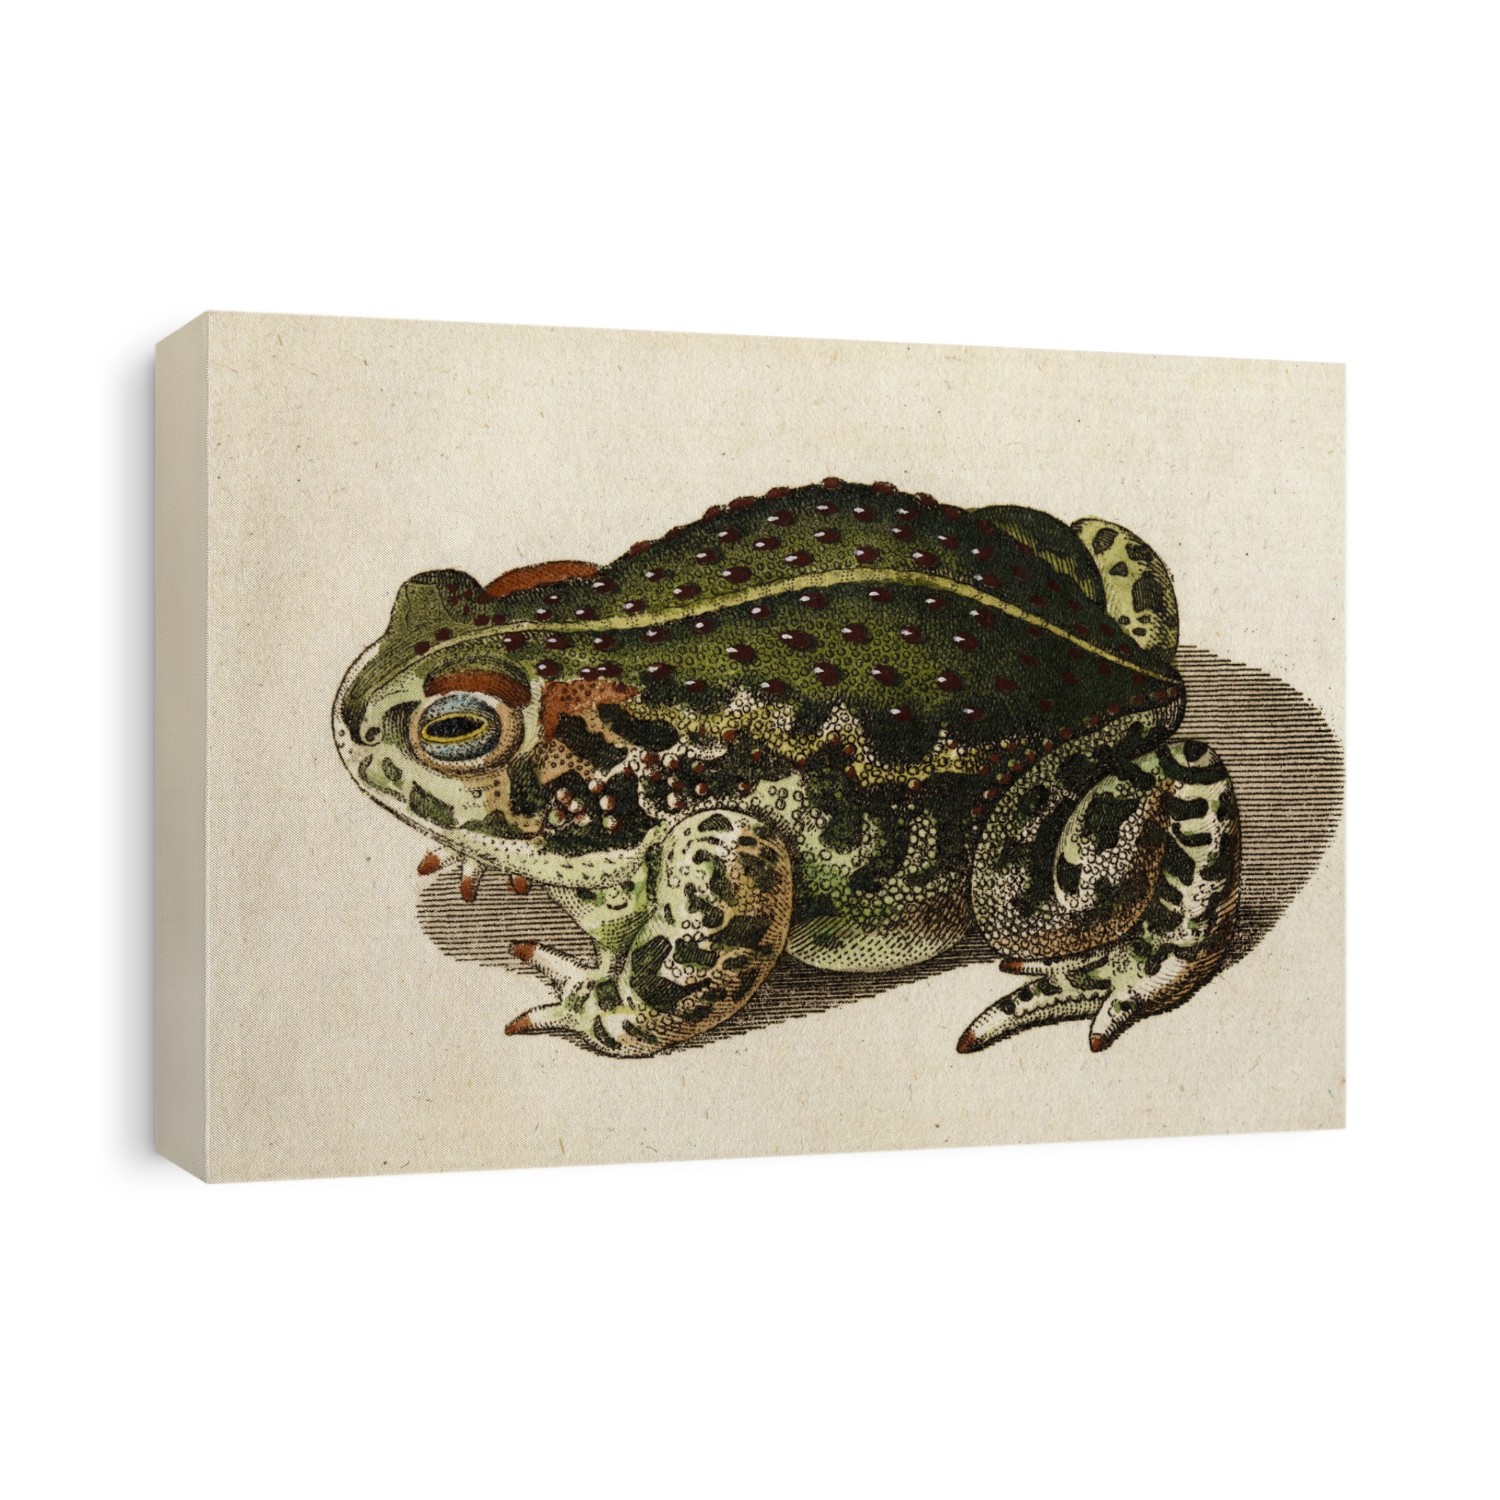 Toad, Rana variabilis, (now called Green Toad - Pseudepidalea viridis) with original hand colour, from Bechstein 